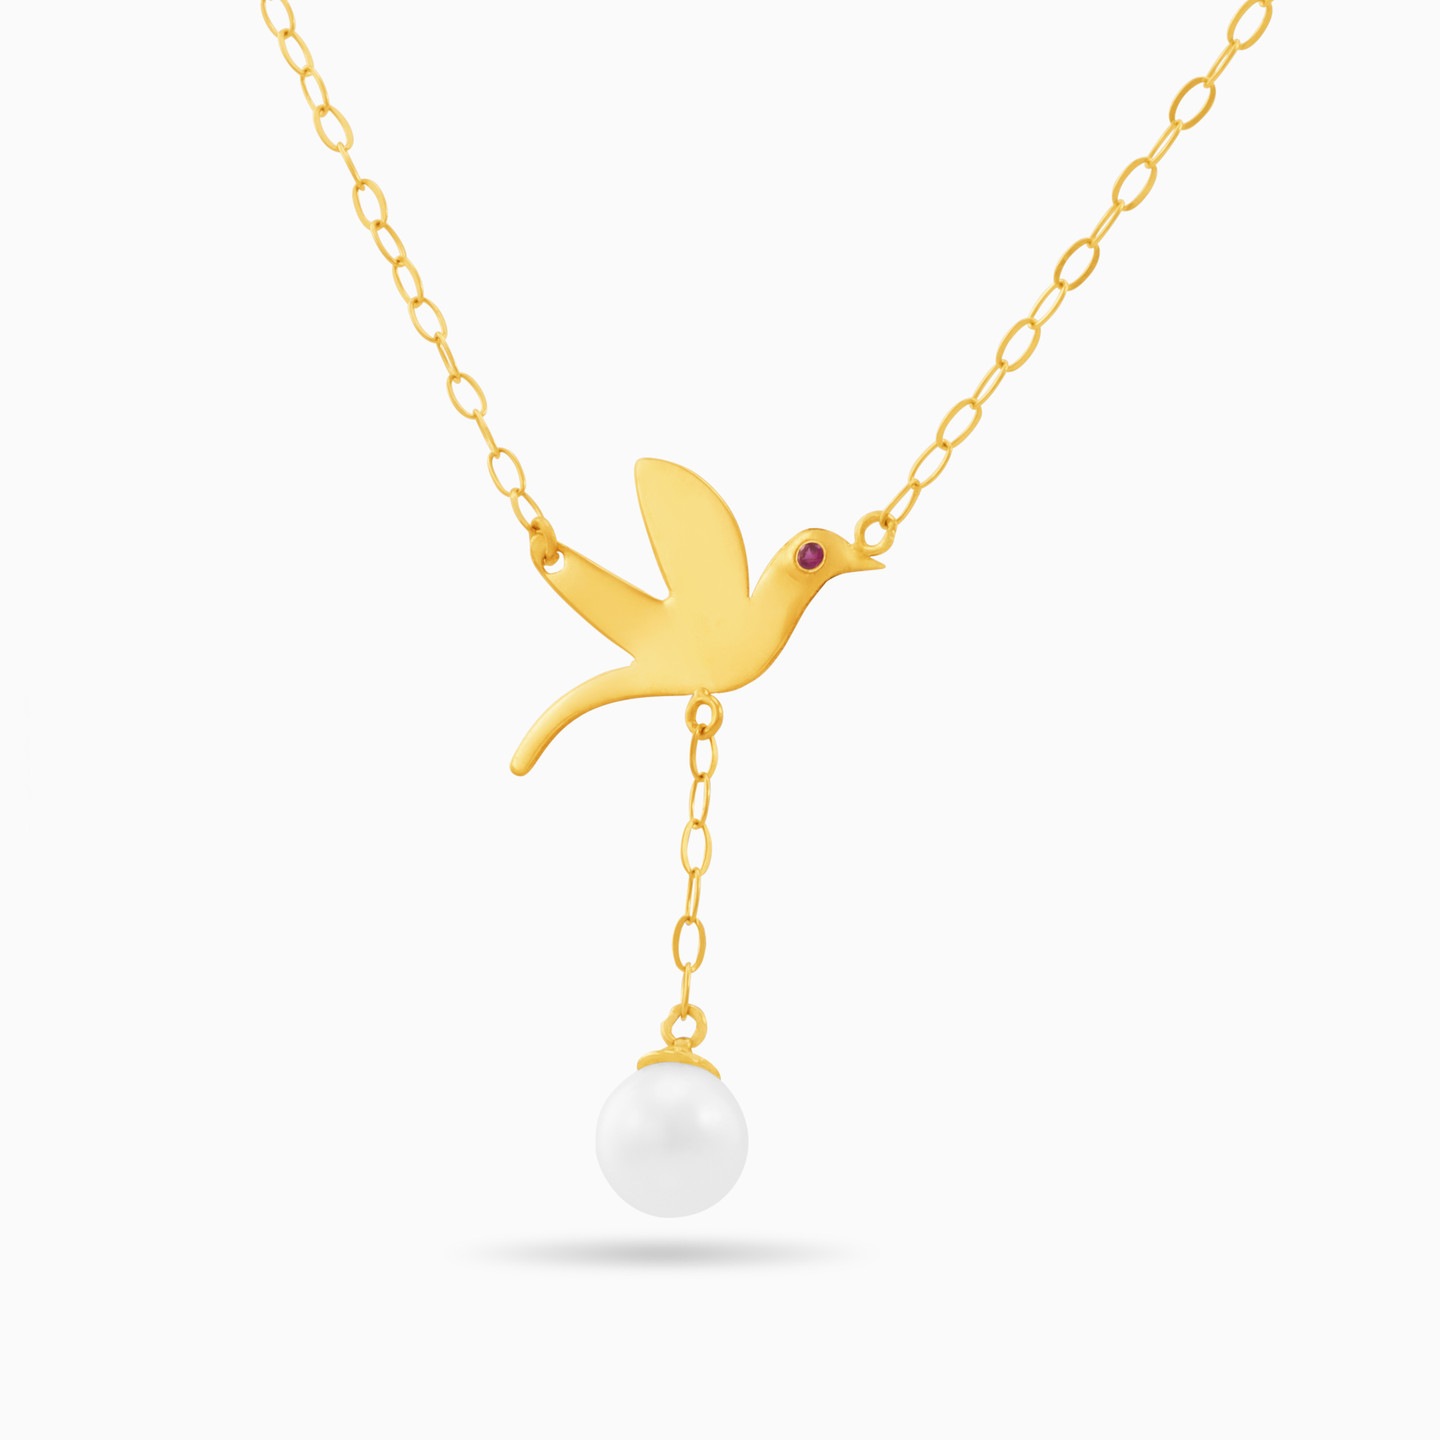 18K Gold Pearl Pendant Necklace - 2